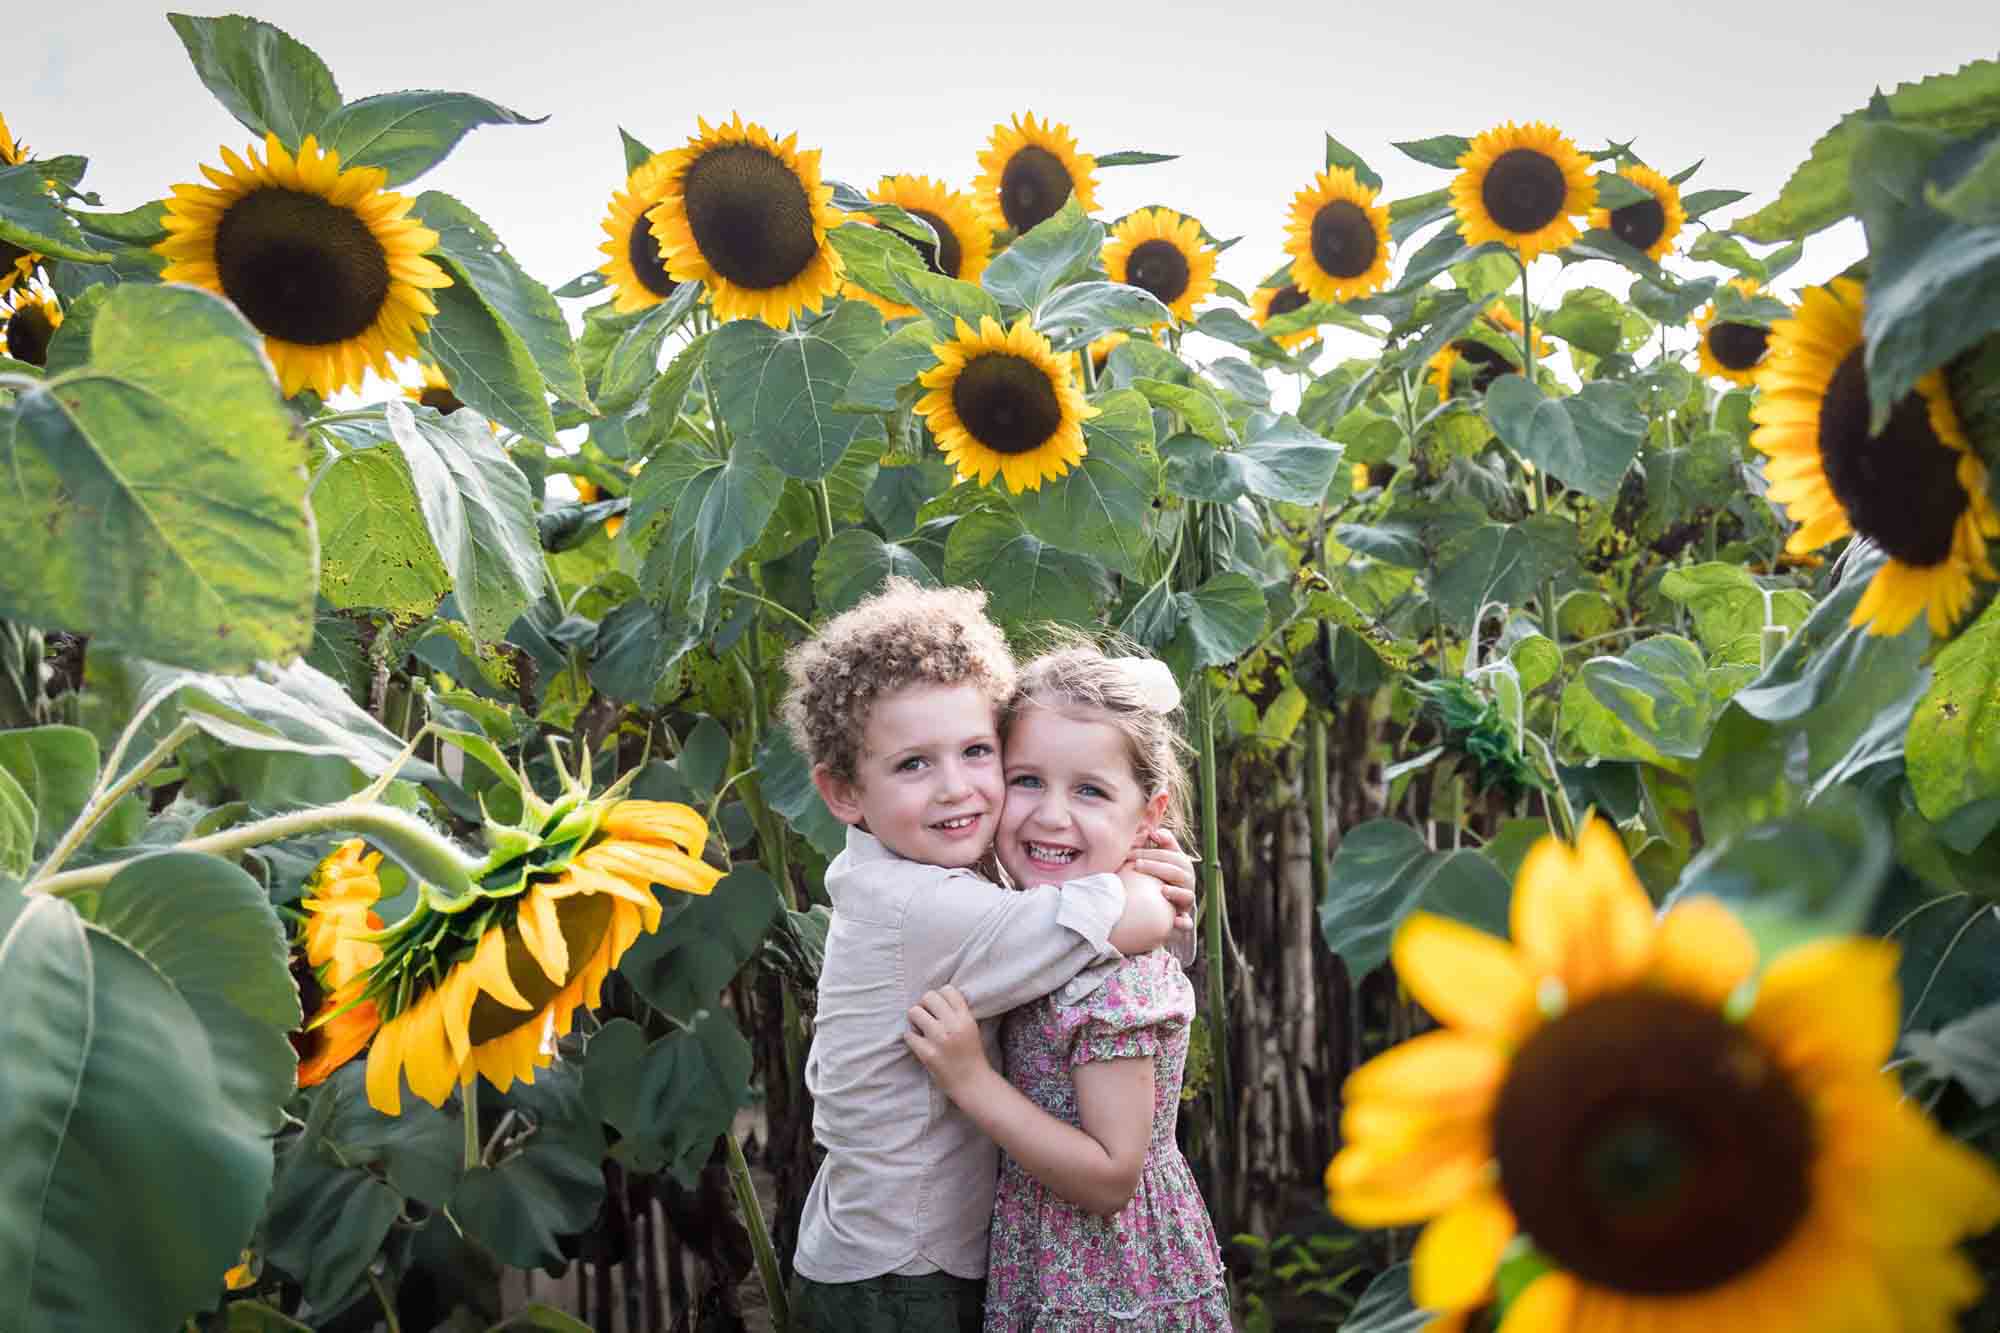 Little boy and girl hugging in sunflower field for an article on sunflower photo shoot tips